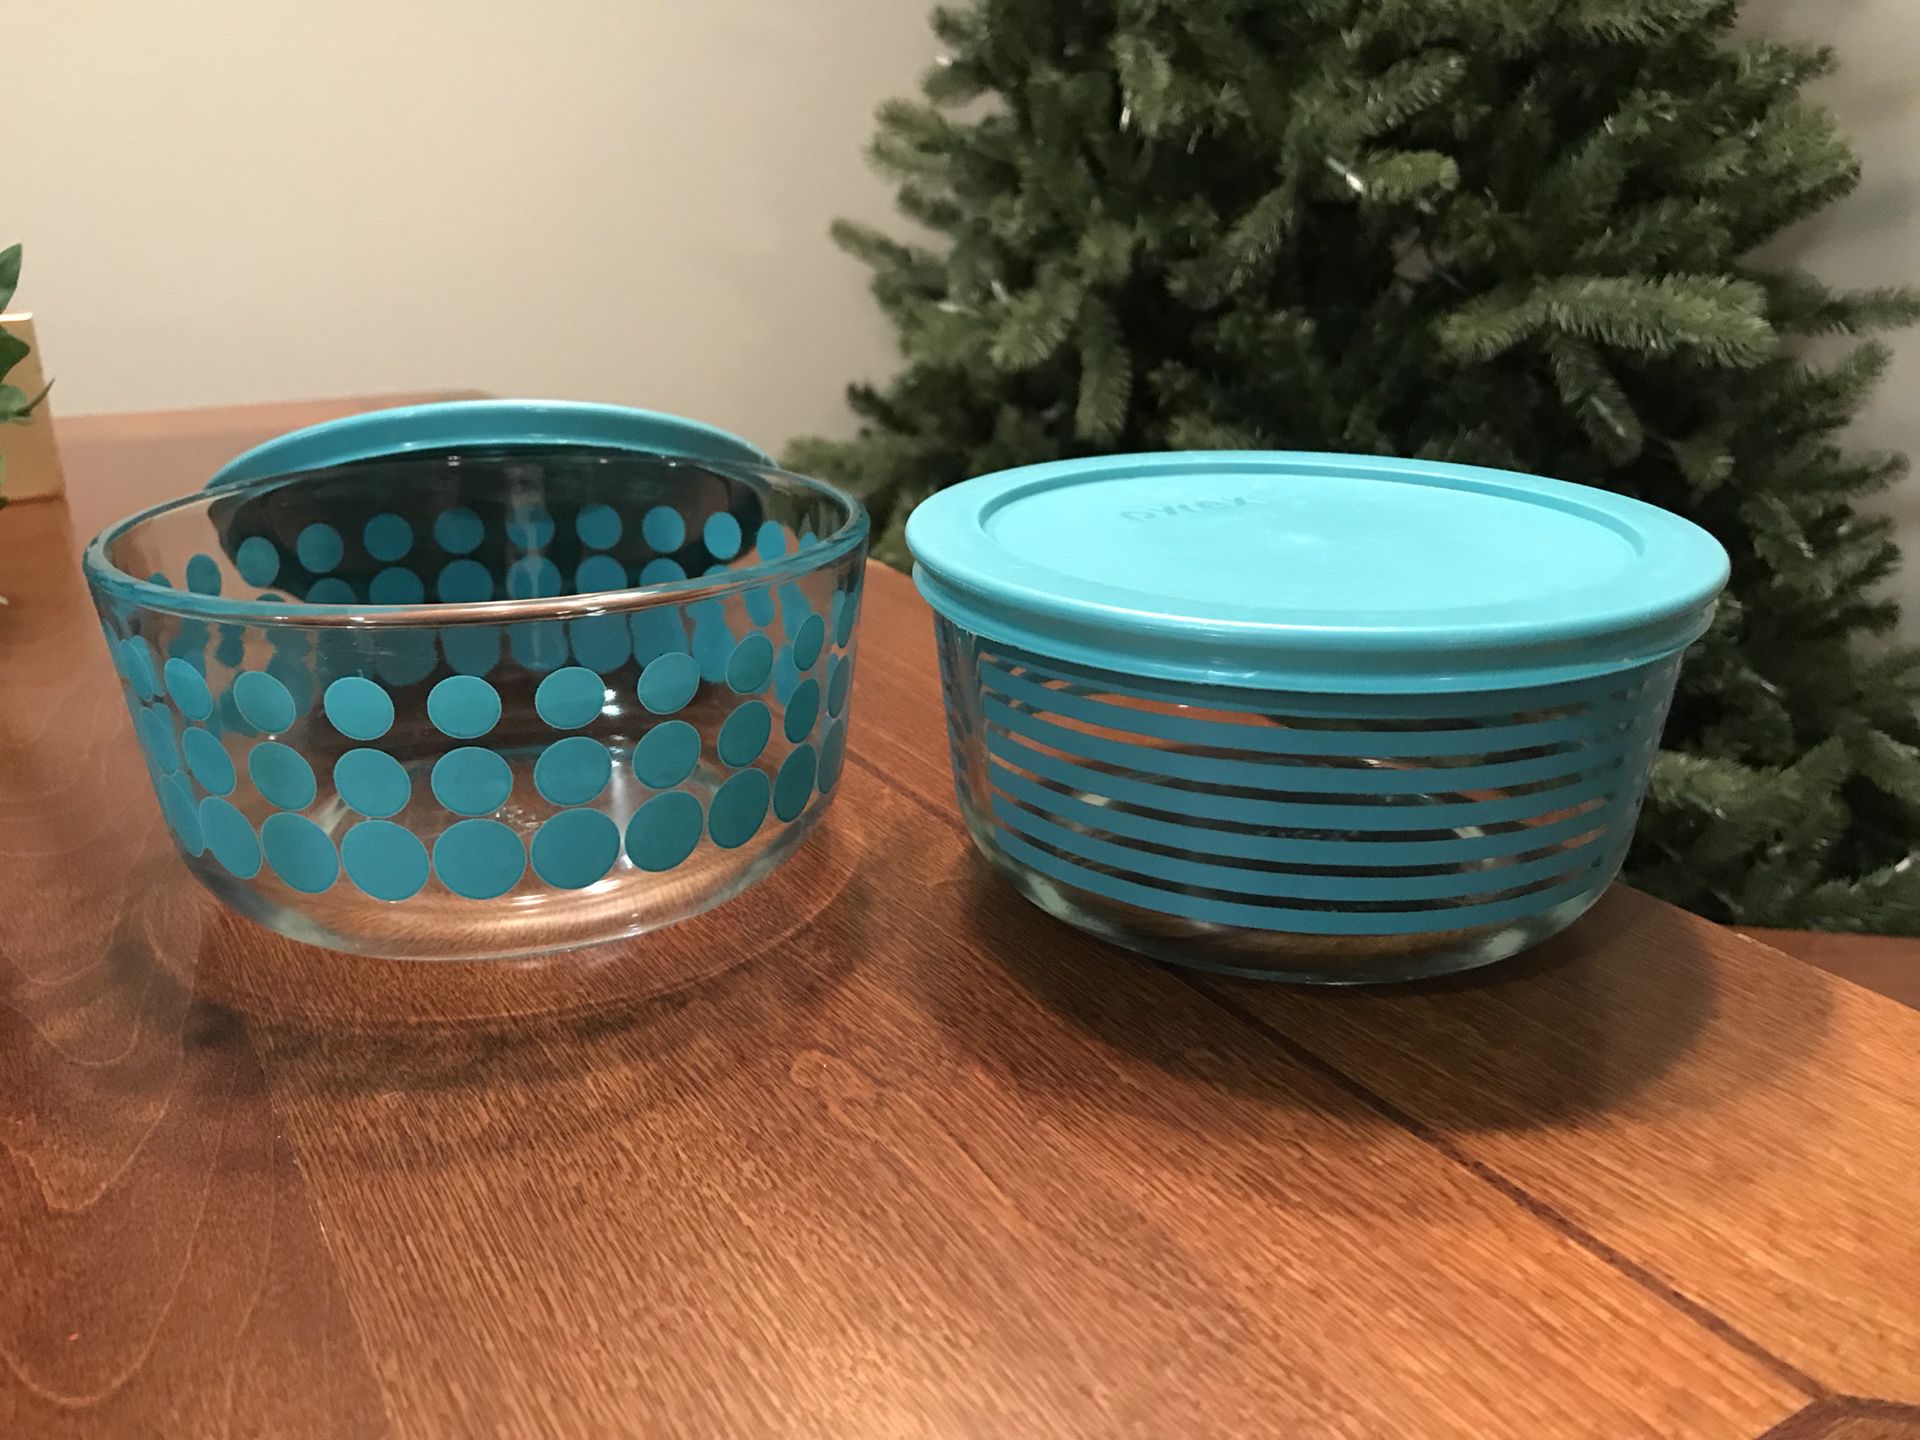 4 Pyrex glass bowls with lids